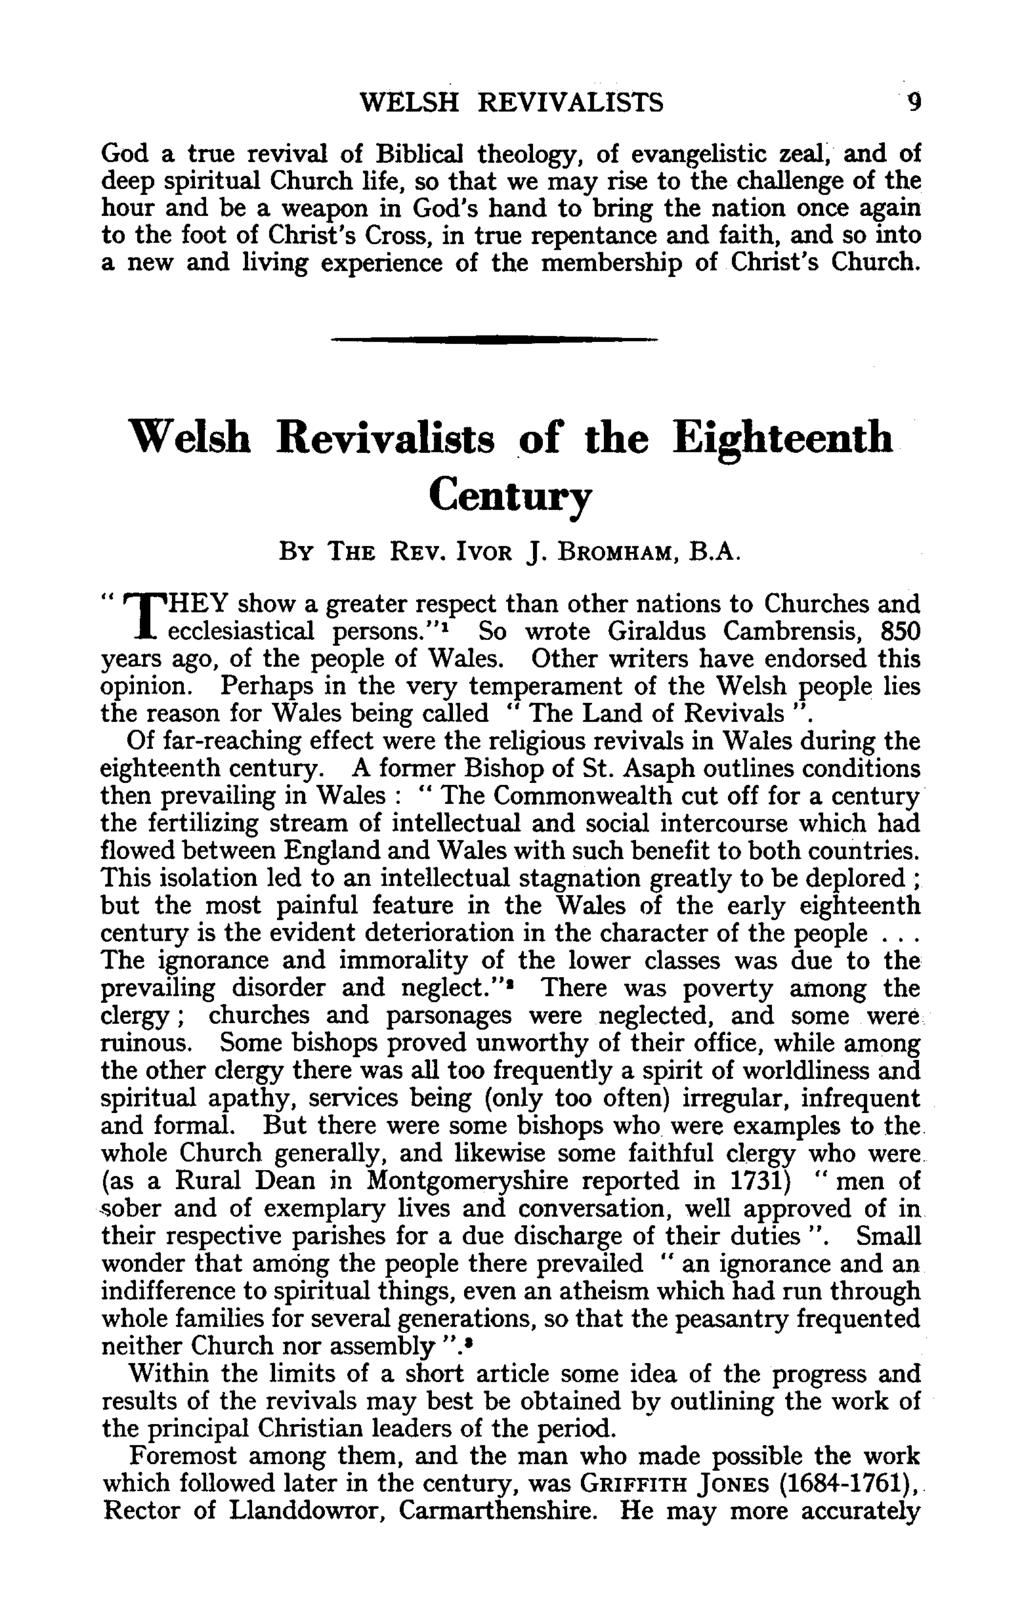 WELSH REVIVALISTS 9 God a true revival of Biblical theology, of evangelistic zeal, and of deep spiritual Church life, so that we may rise to the challenge of the hour and be a weapon in God's hand to